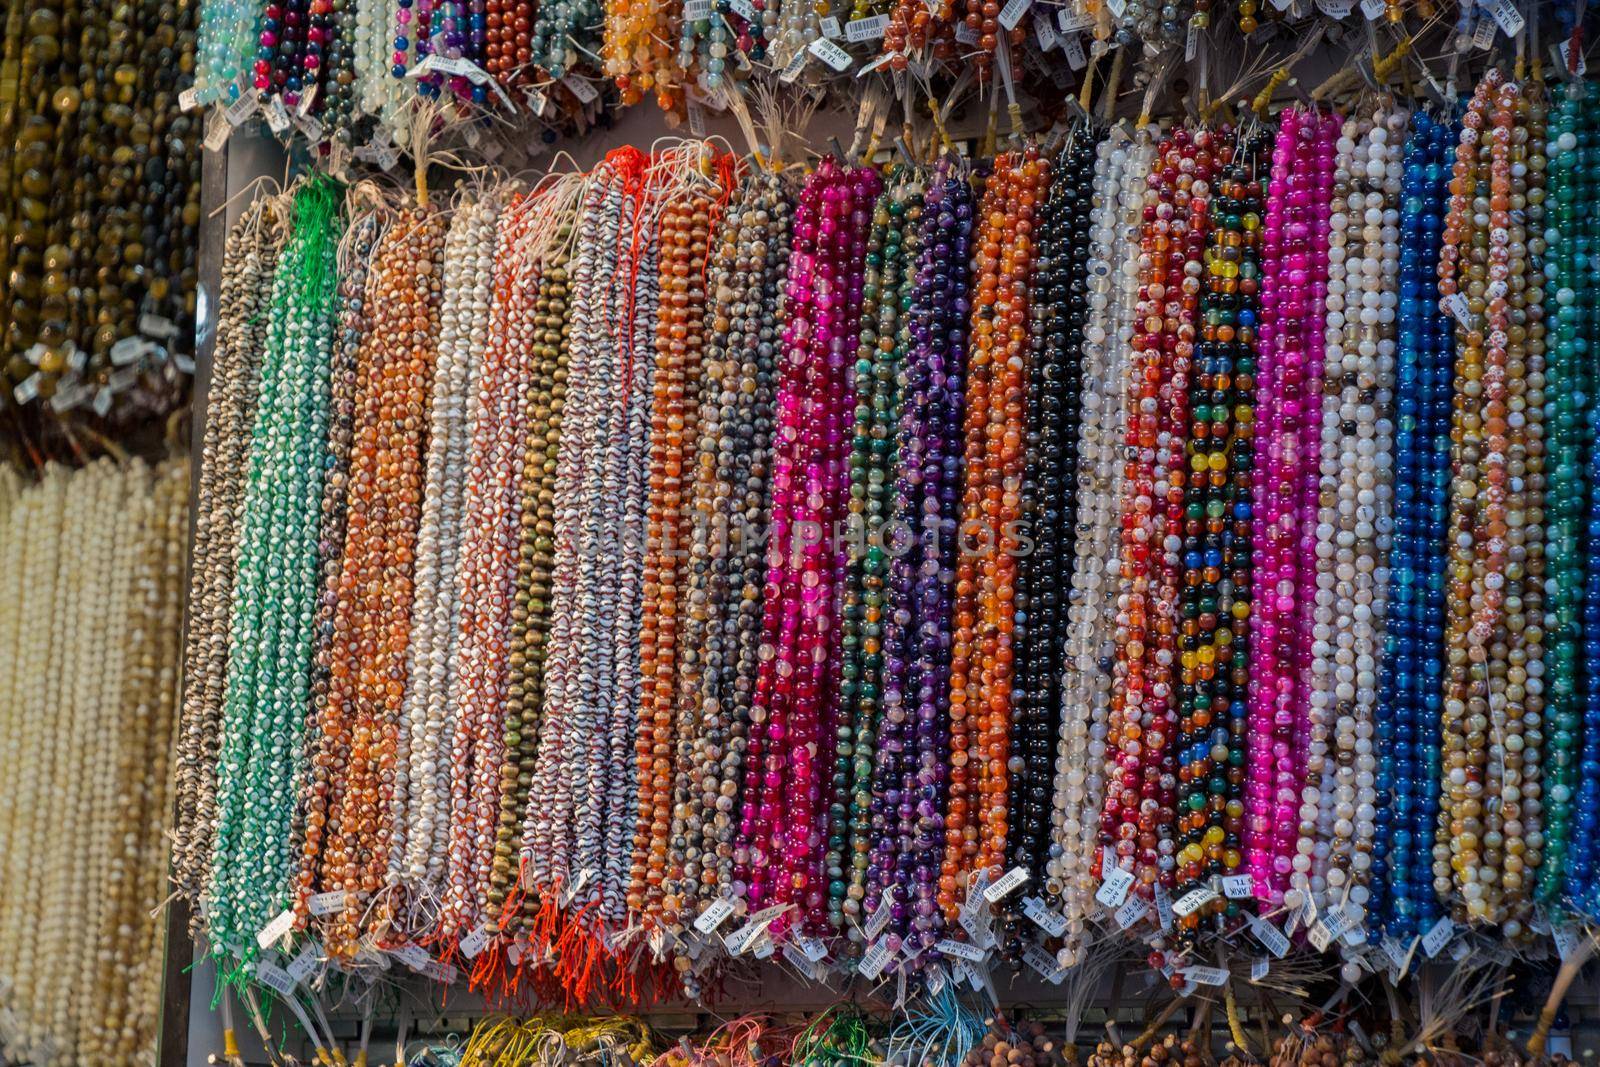 Colorful beads of various color at a market